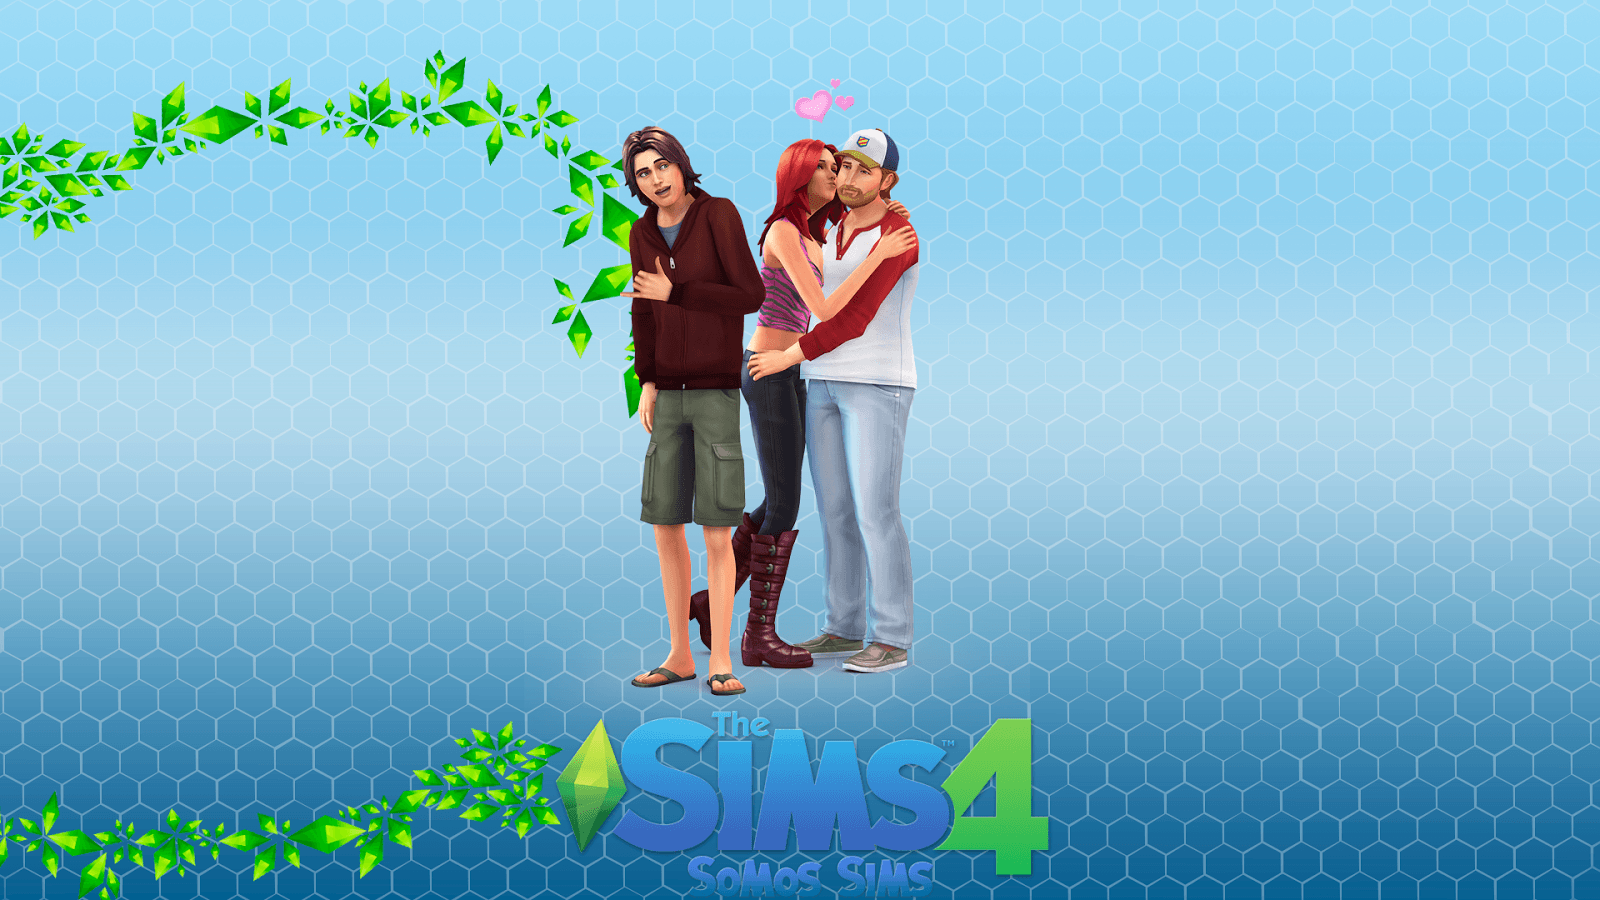 The Sims 4 Wallpaper Games Online HD.png